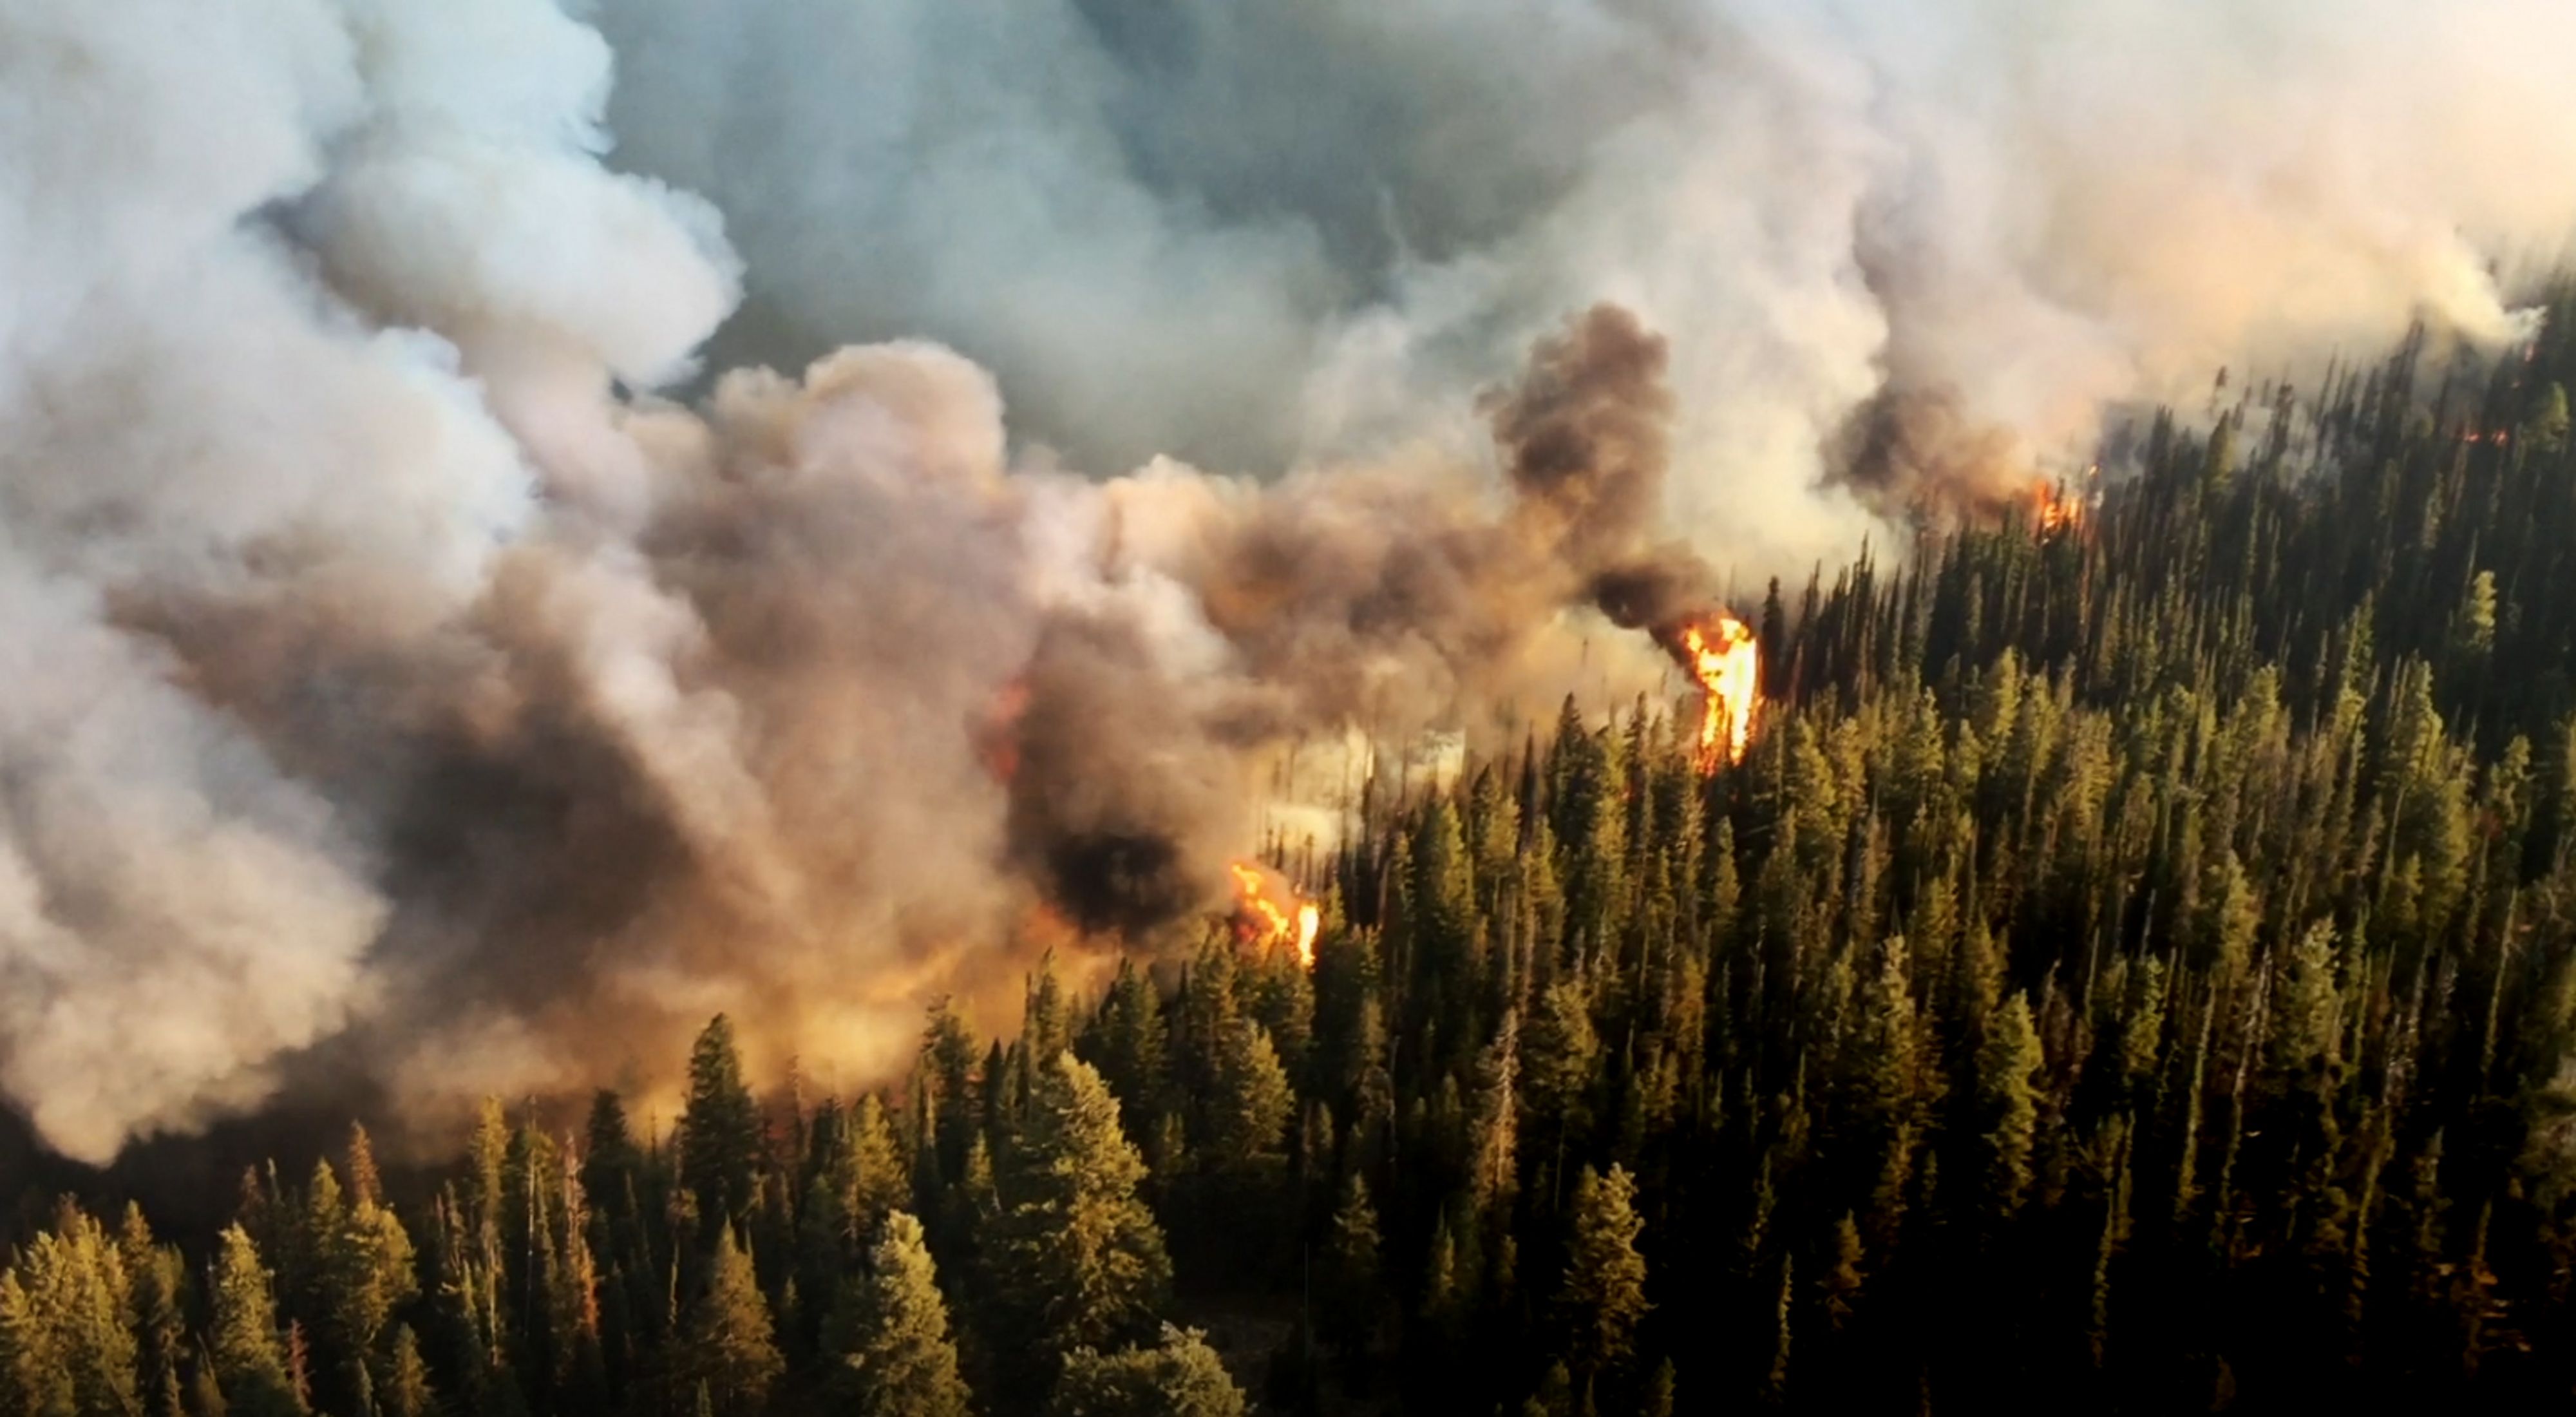 A line of wildfire burns in an Idaho forest, with smoke in the upper part of the photo and forest in the bottom part.